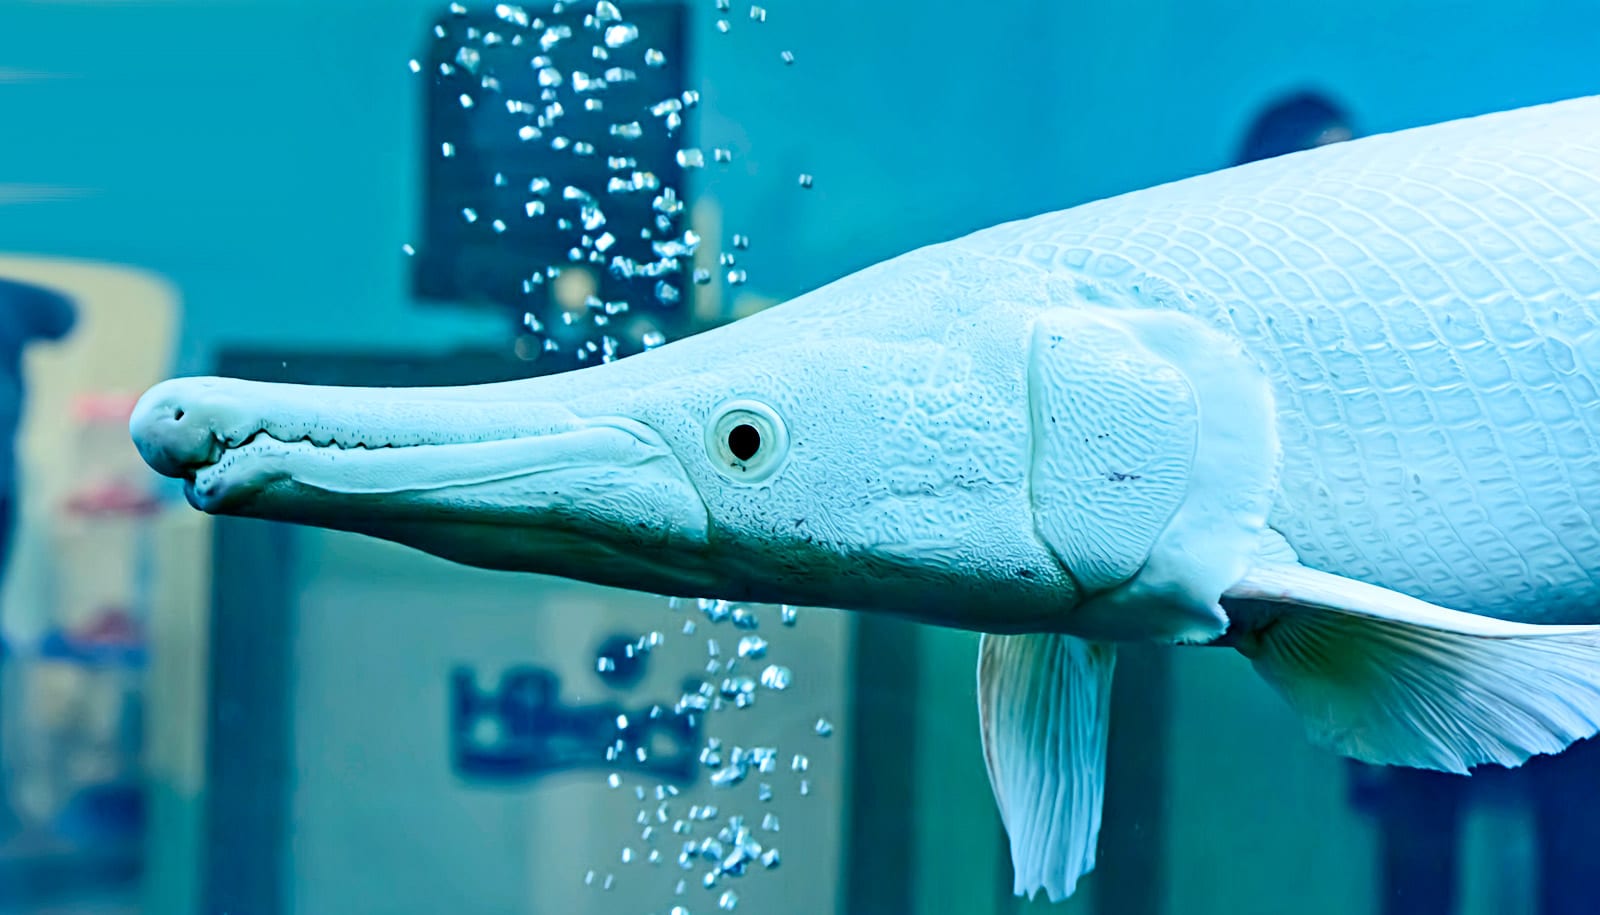 The scales of this fish are inspiring great gloves - Futurity